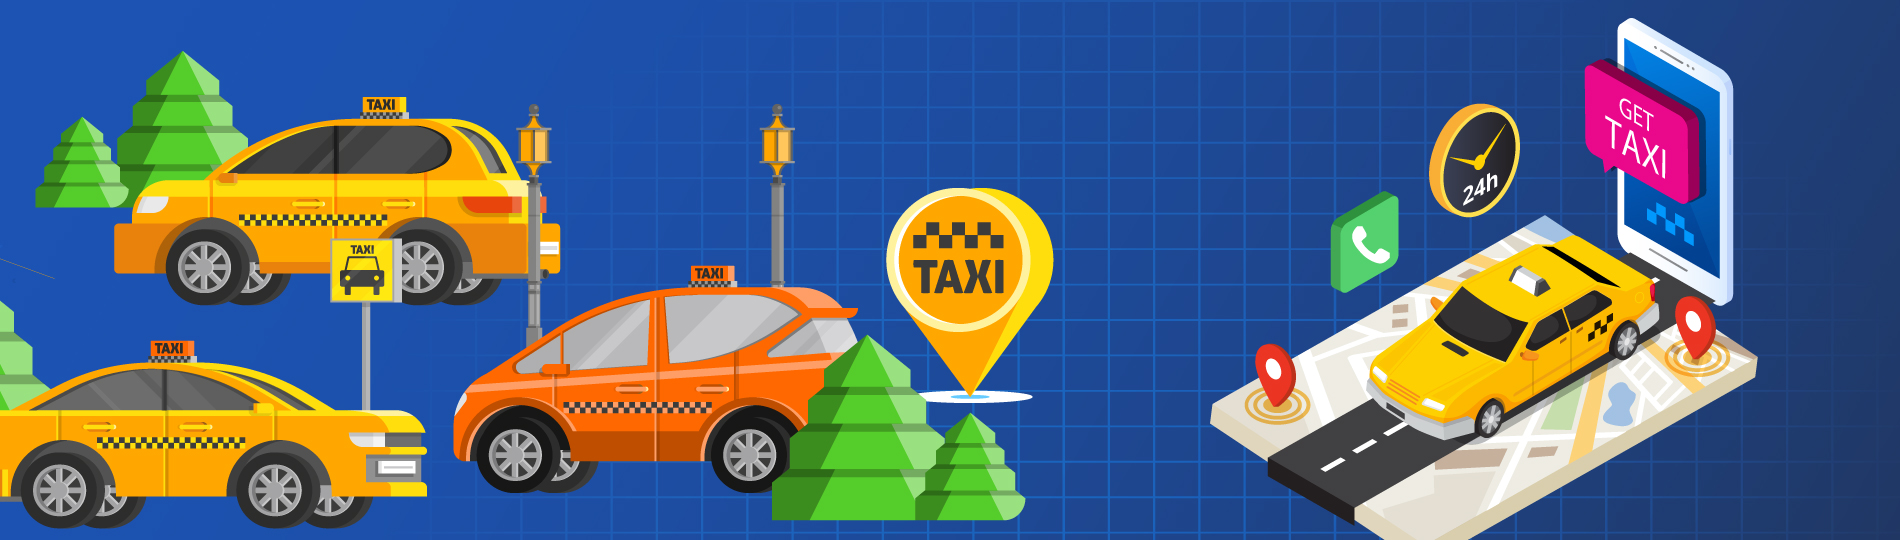 Online taxi booking platform to get instant taxi service